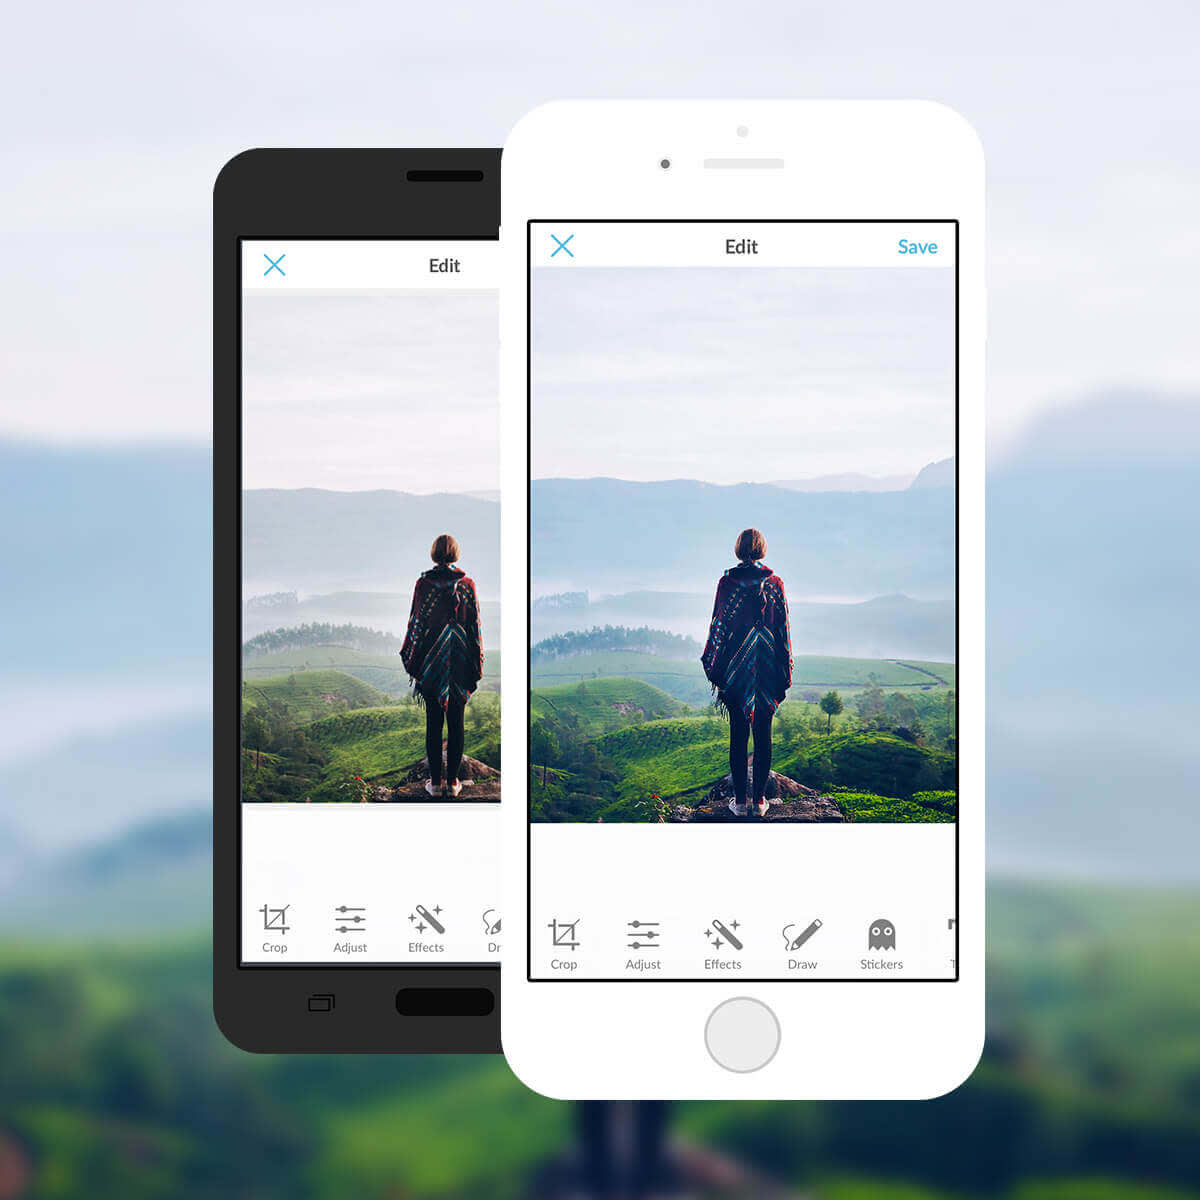 Get ultimate photo control when you use paint-on photo editing tools in the free PicMonkey mobile app!